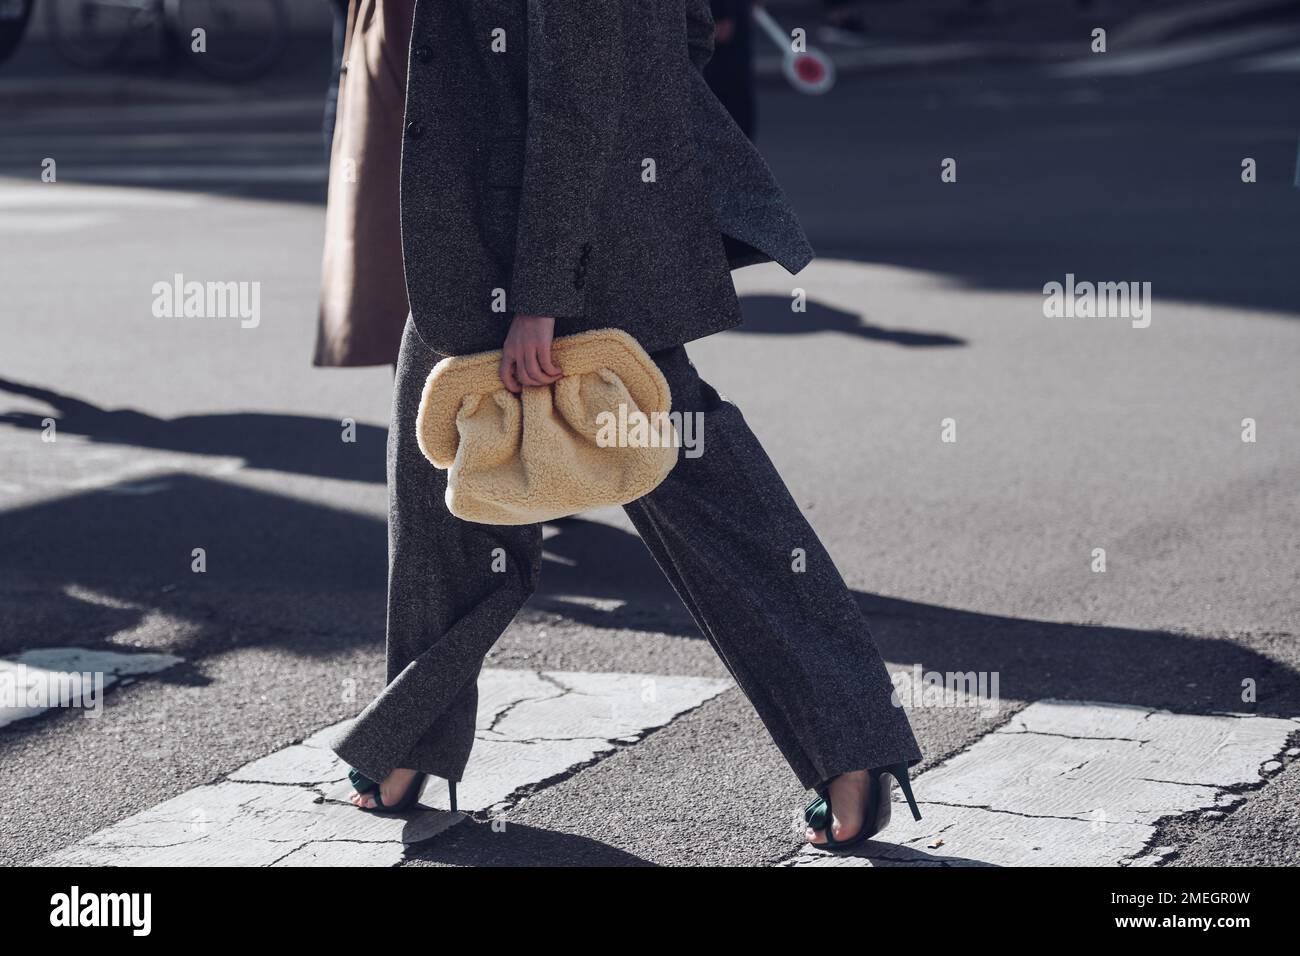 Milan, Italy - February 25, 2022: Woman in trendy wool suit with palazzo pants and high heels. Stock Photo